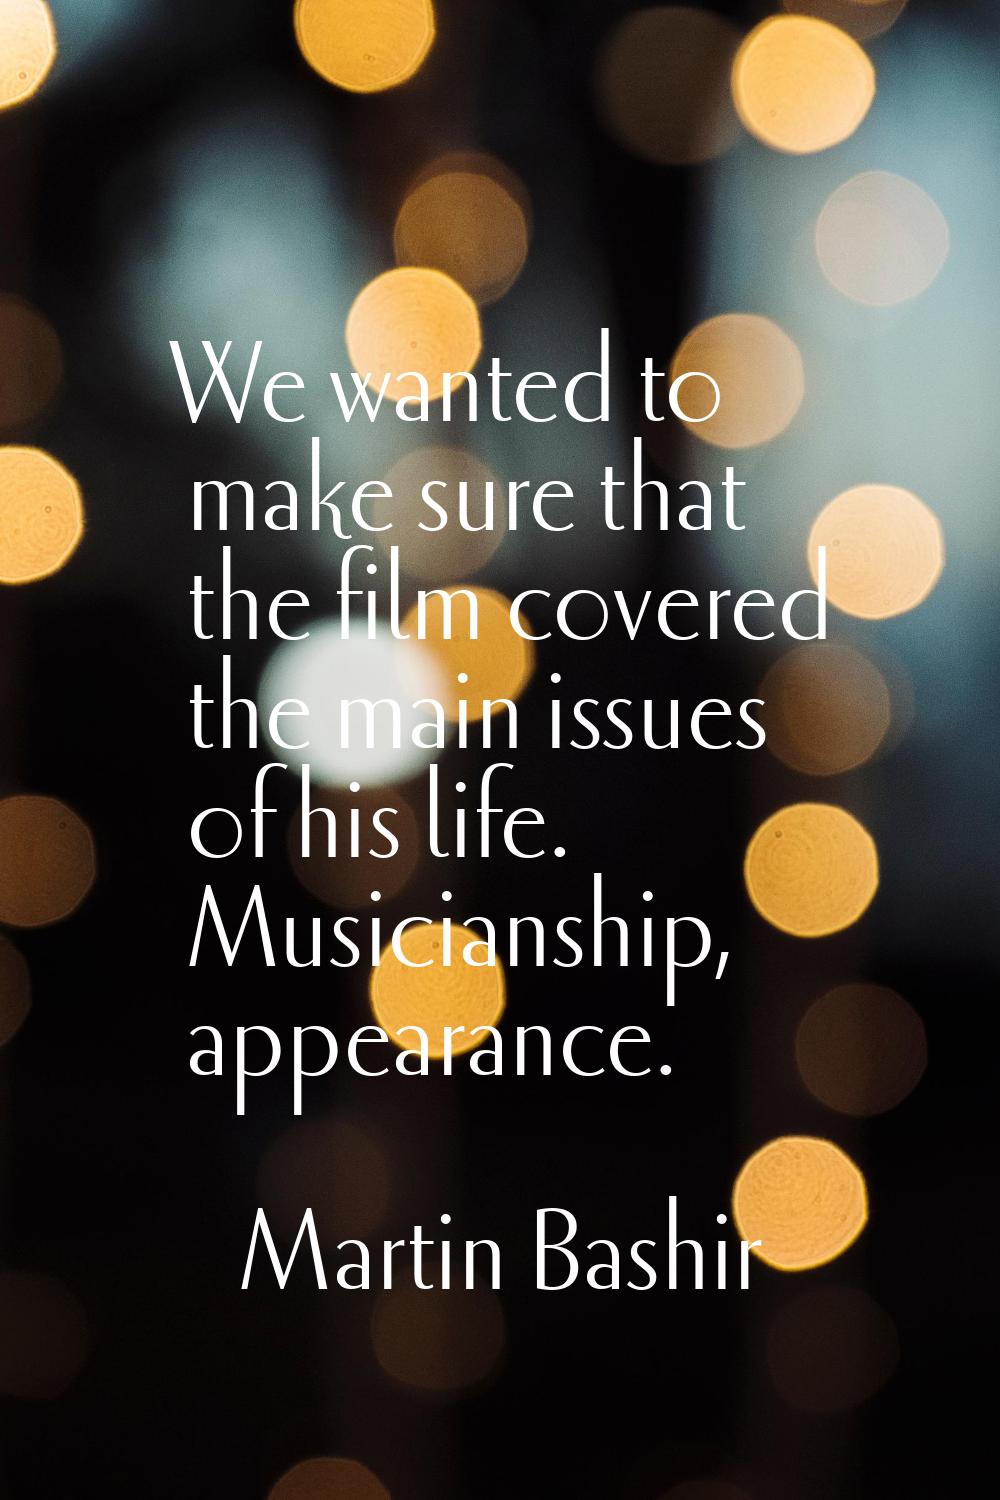 We wanted to make sure that the film covered the main issues of his life. Musicianship, appearance.